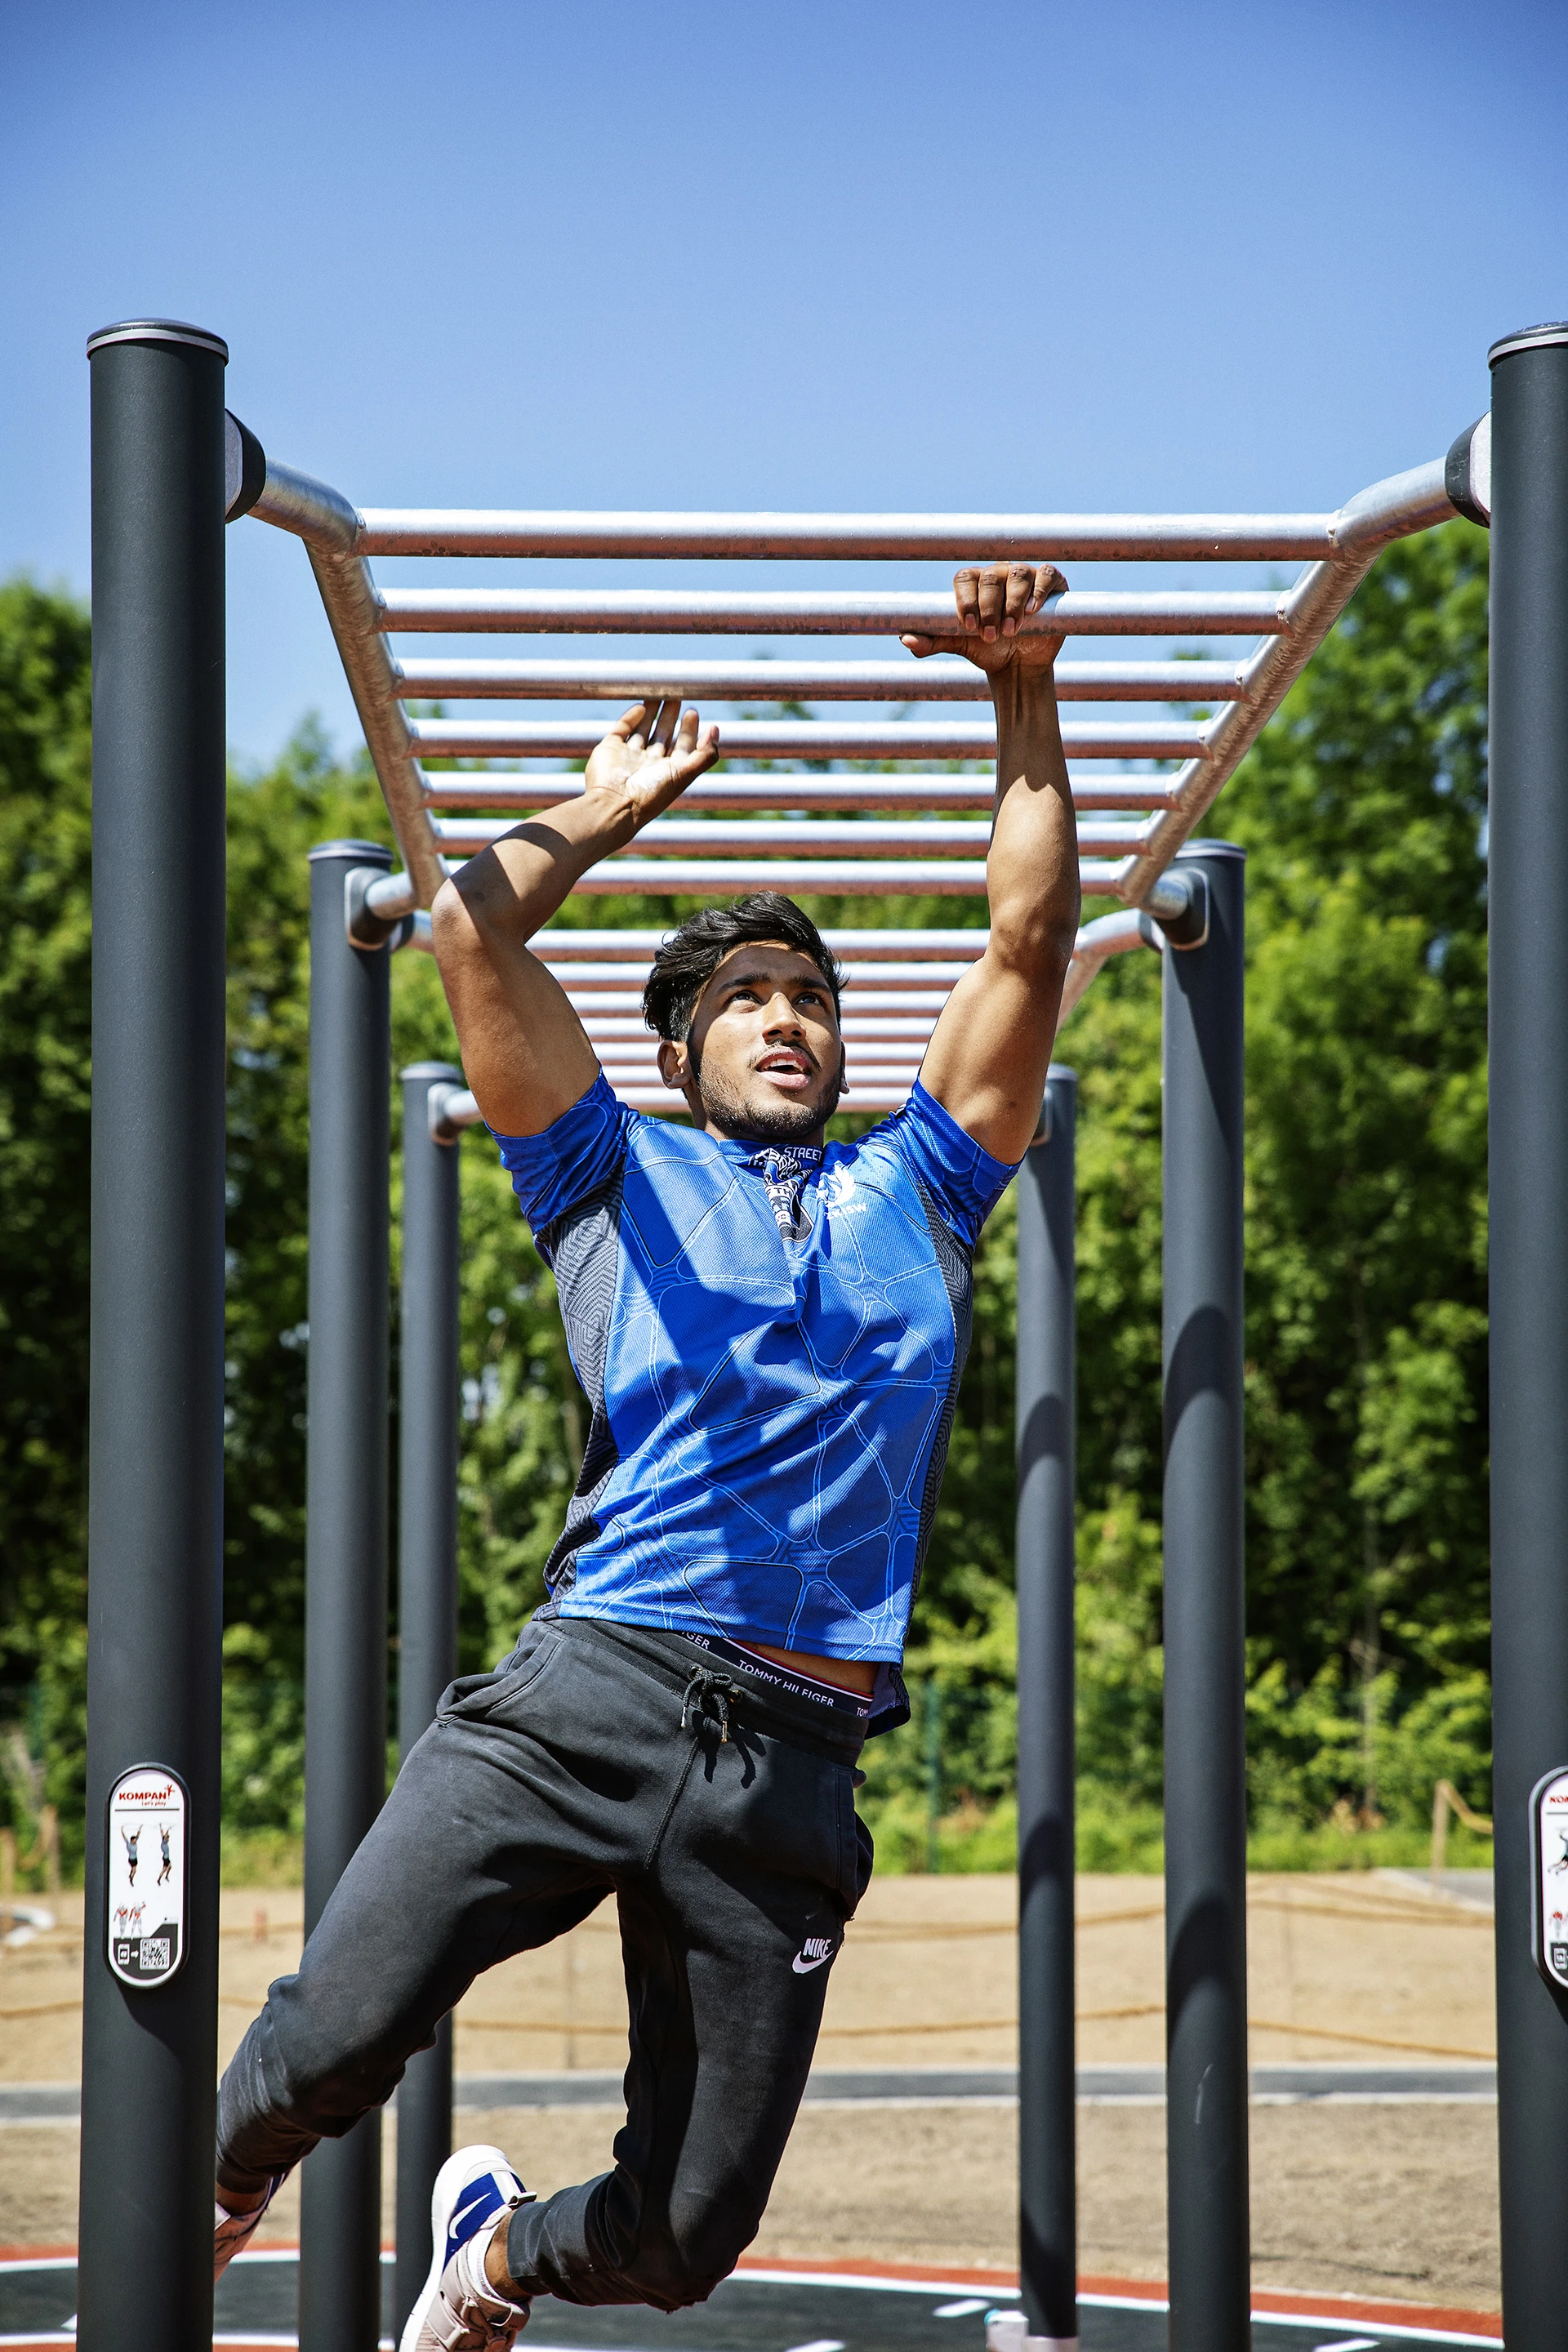 young man working out at an outdoor training station